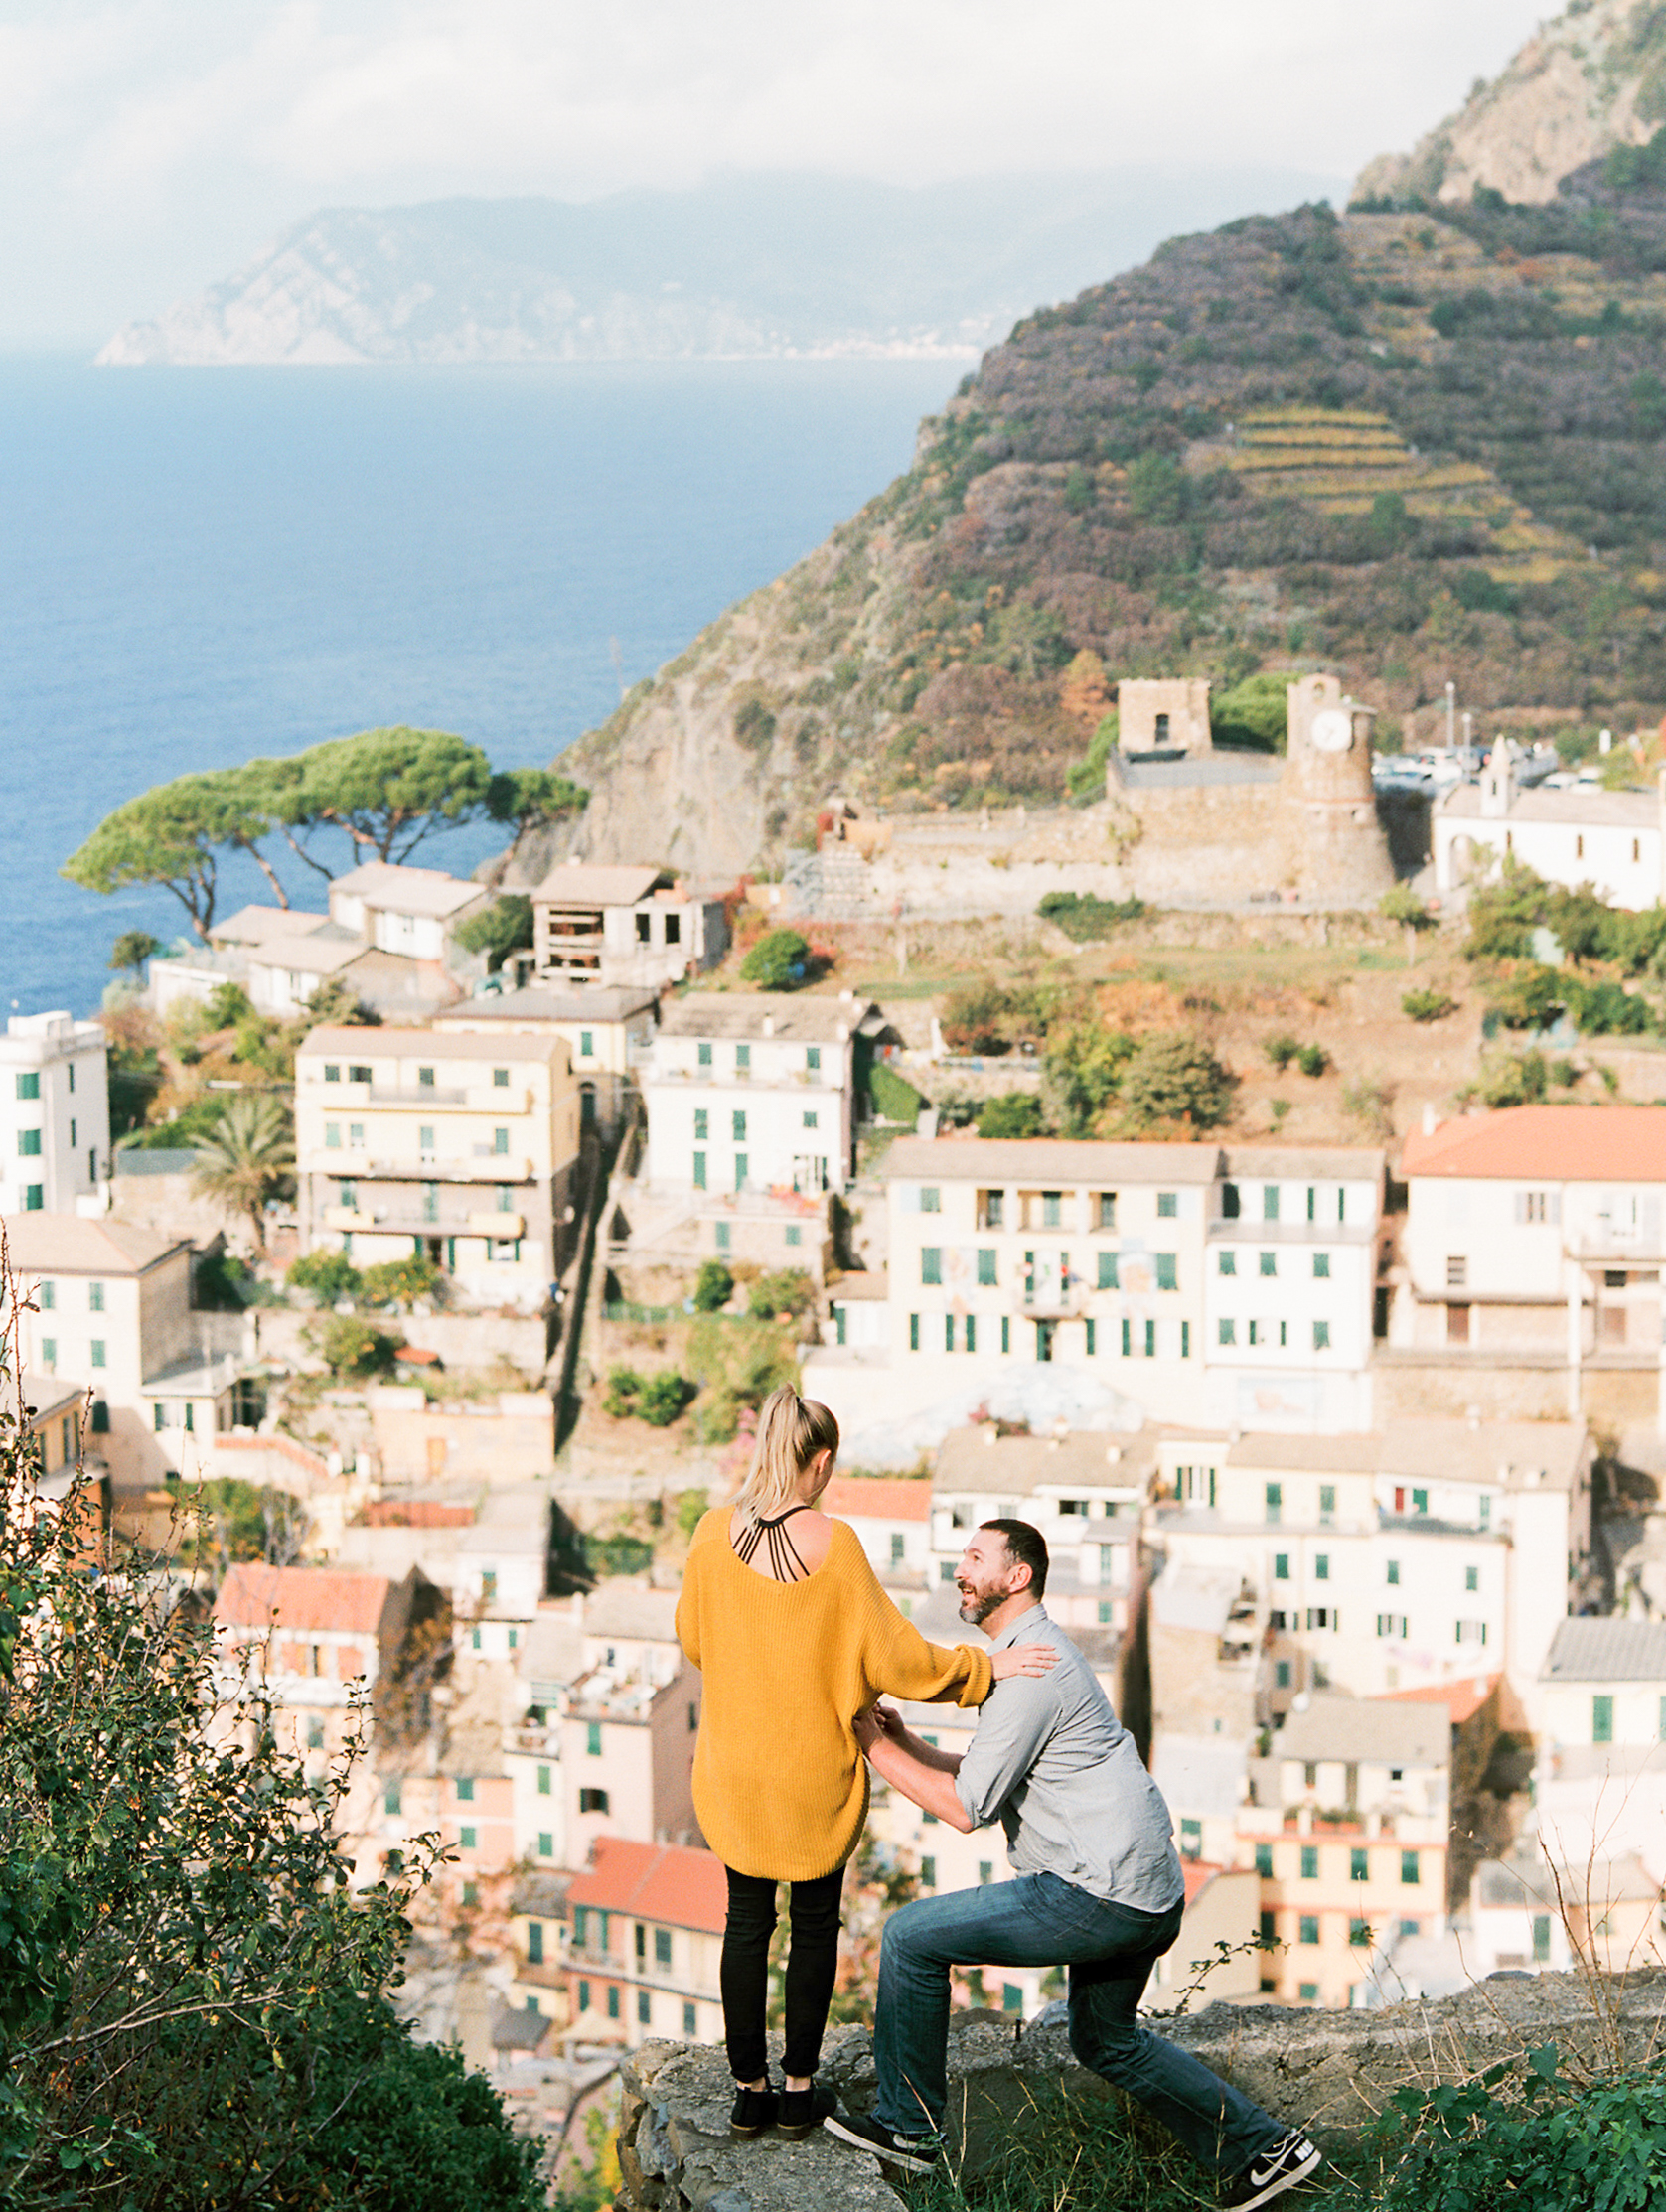 Our Italy Trip and Proposal Story